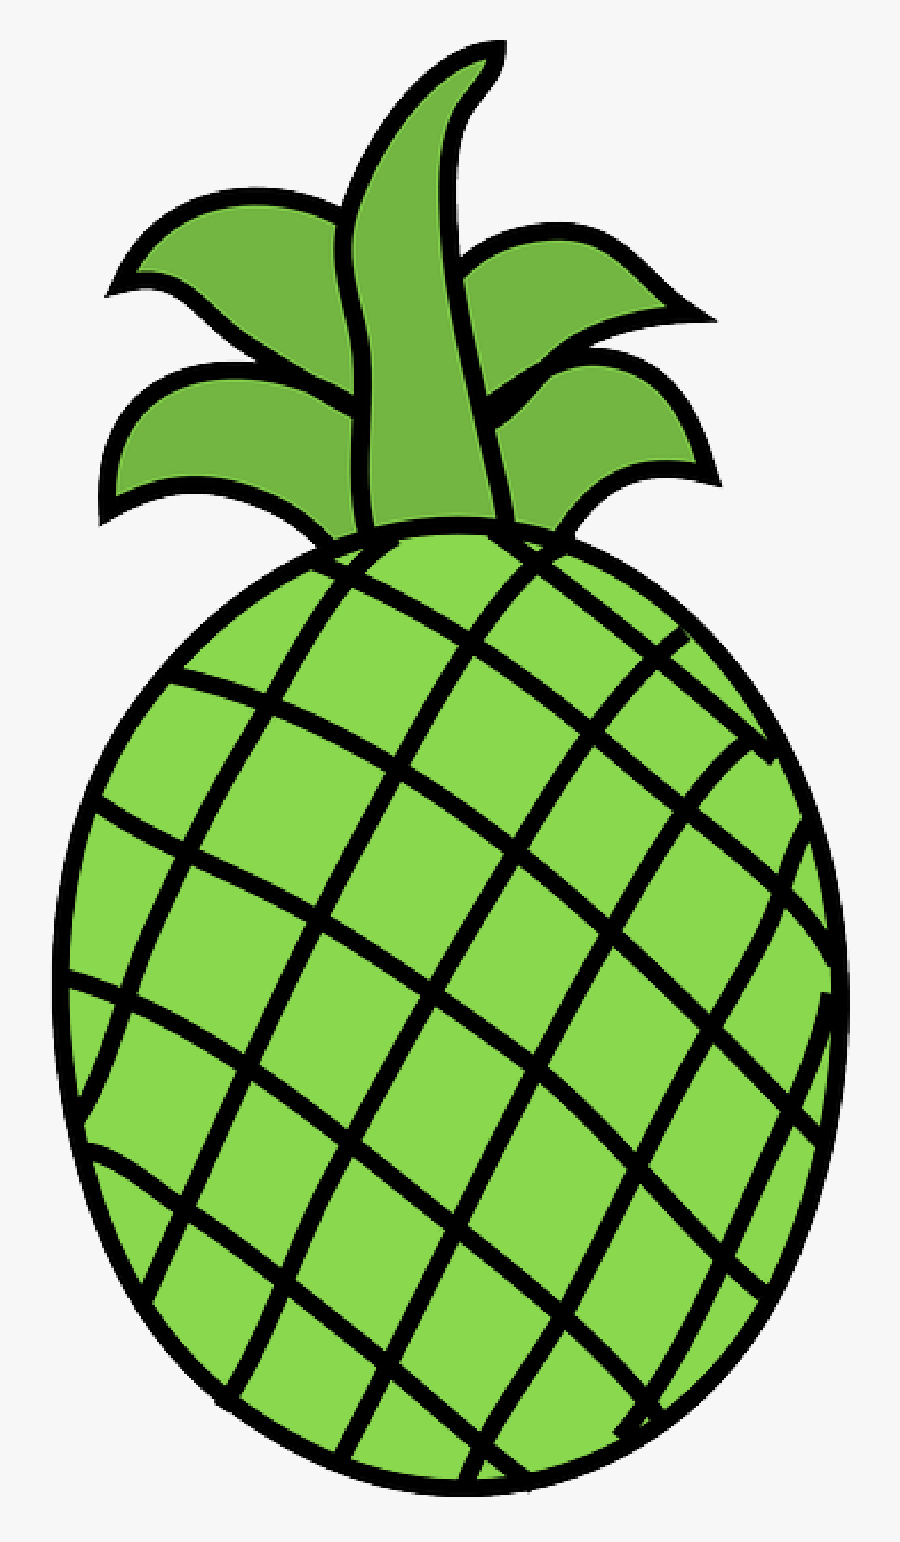 Free Pictures Pineapple - Clip Art Fruits Black And White, Transparent Clipart